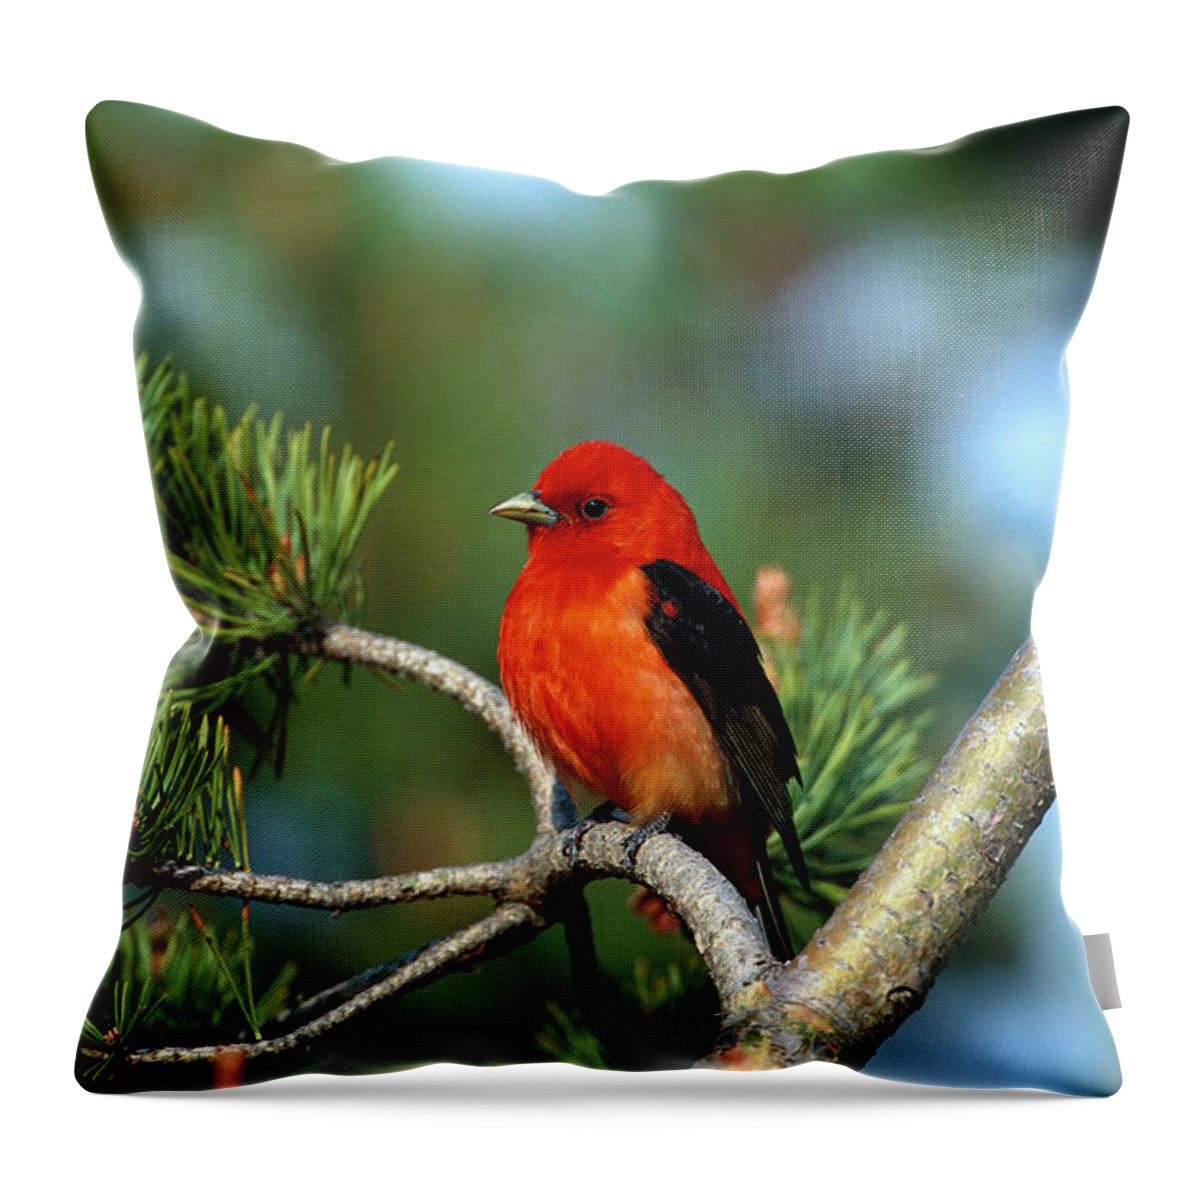 00220164 Throw Pillow featuring the photograph Scarlet Tanager Piranga Olivacea Male by Tom Vezo